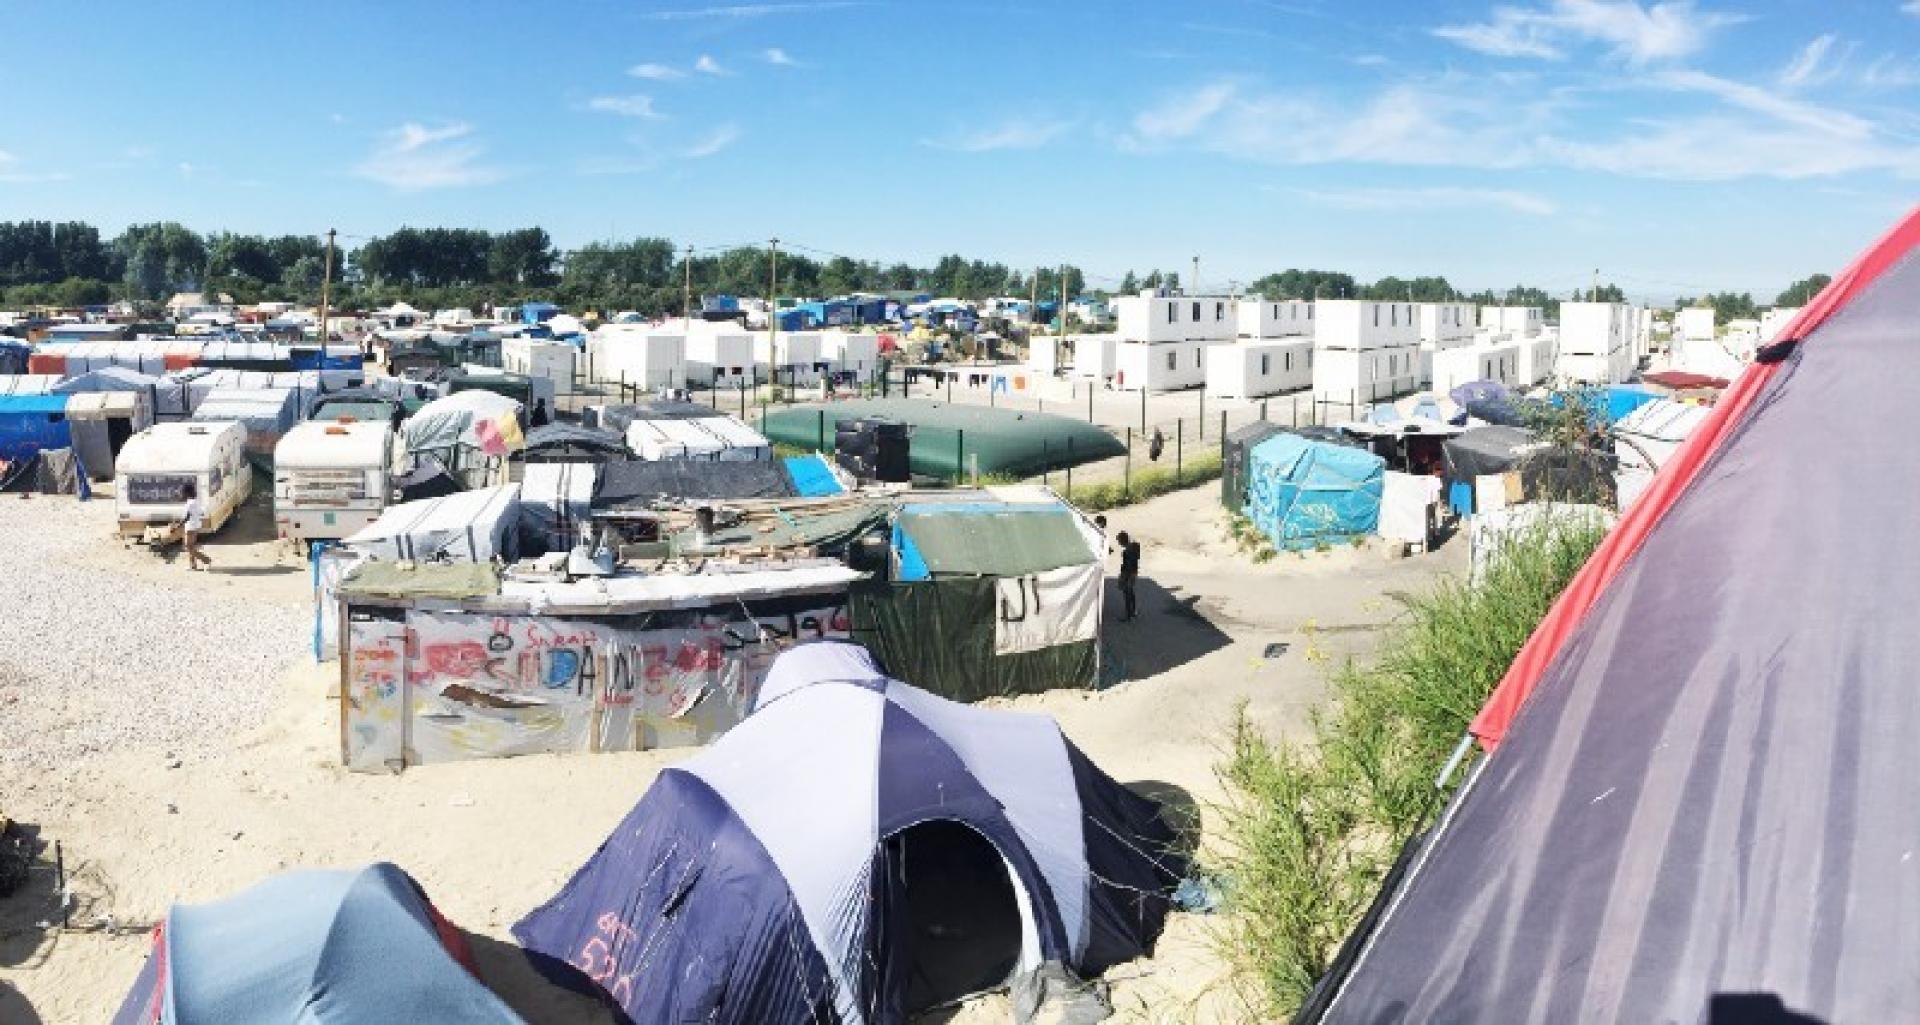 Communities and settlement in Calais Jungle. | Photo: Architecture for Refugees